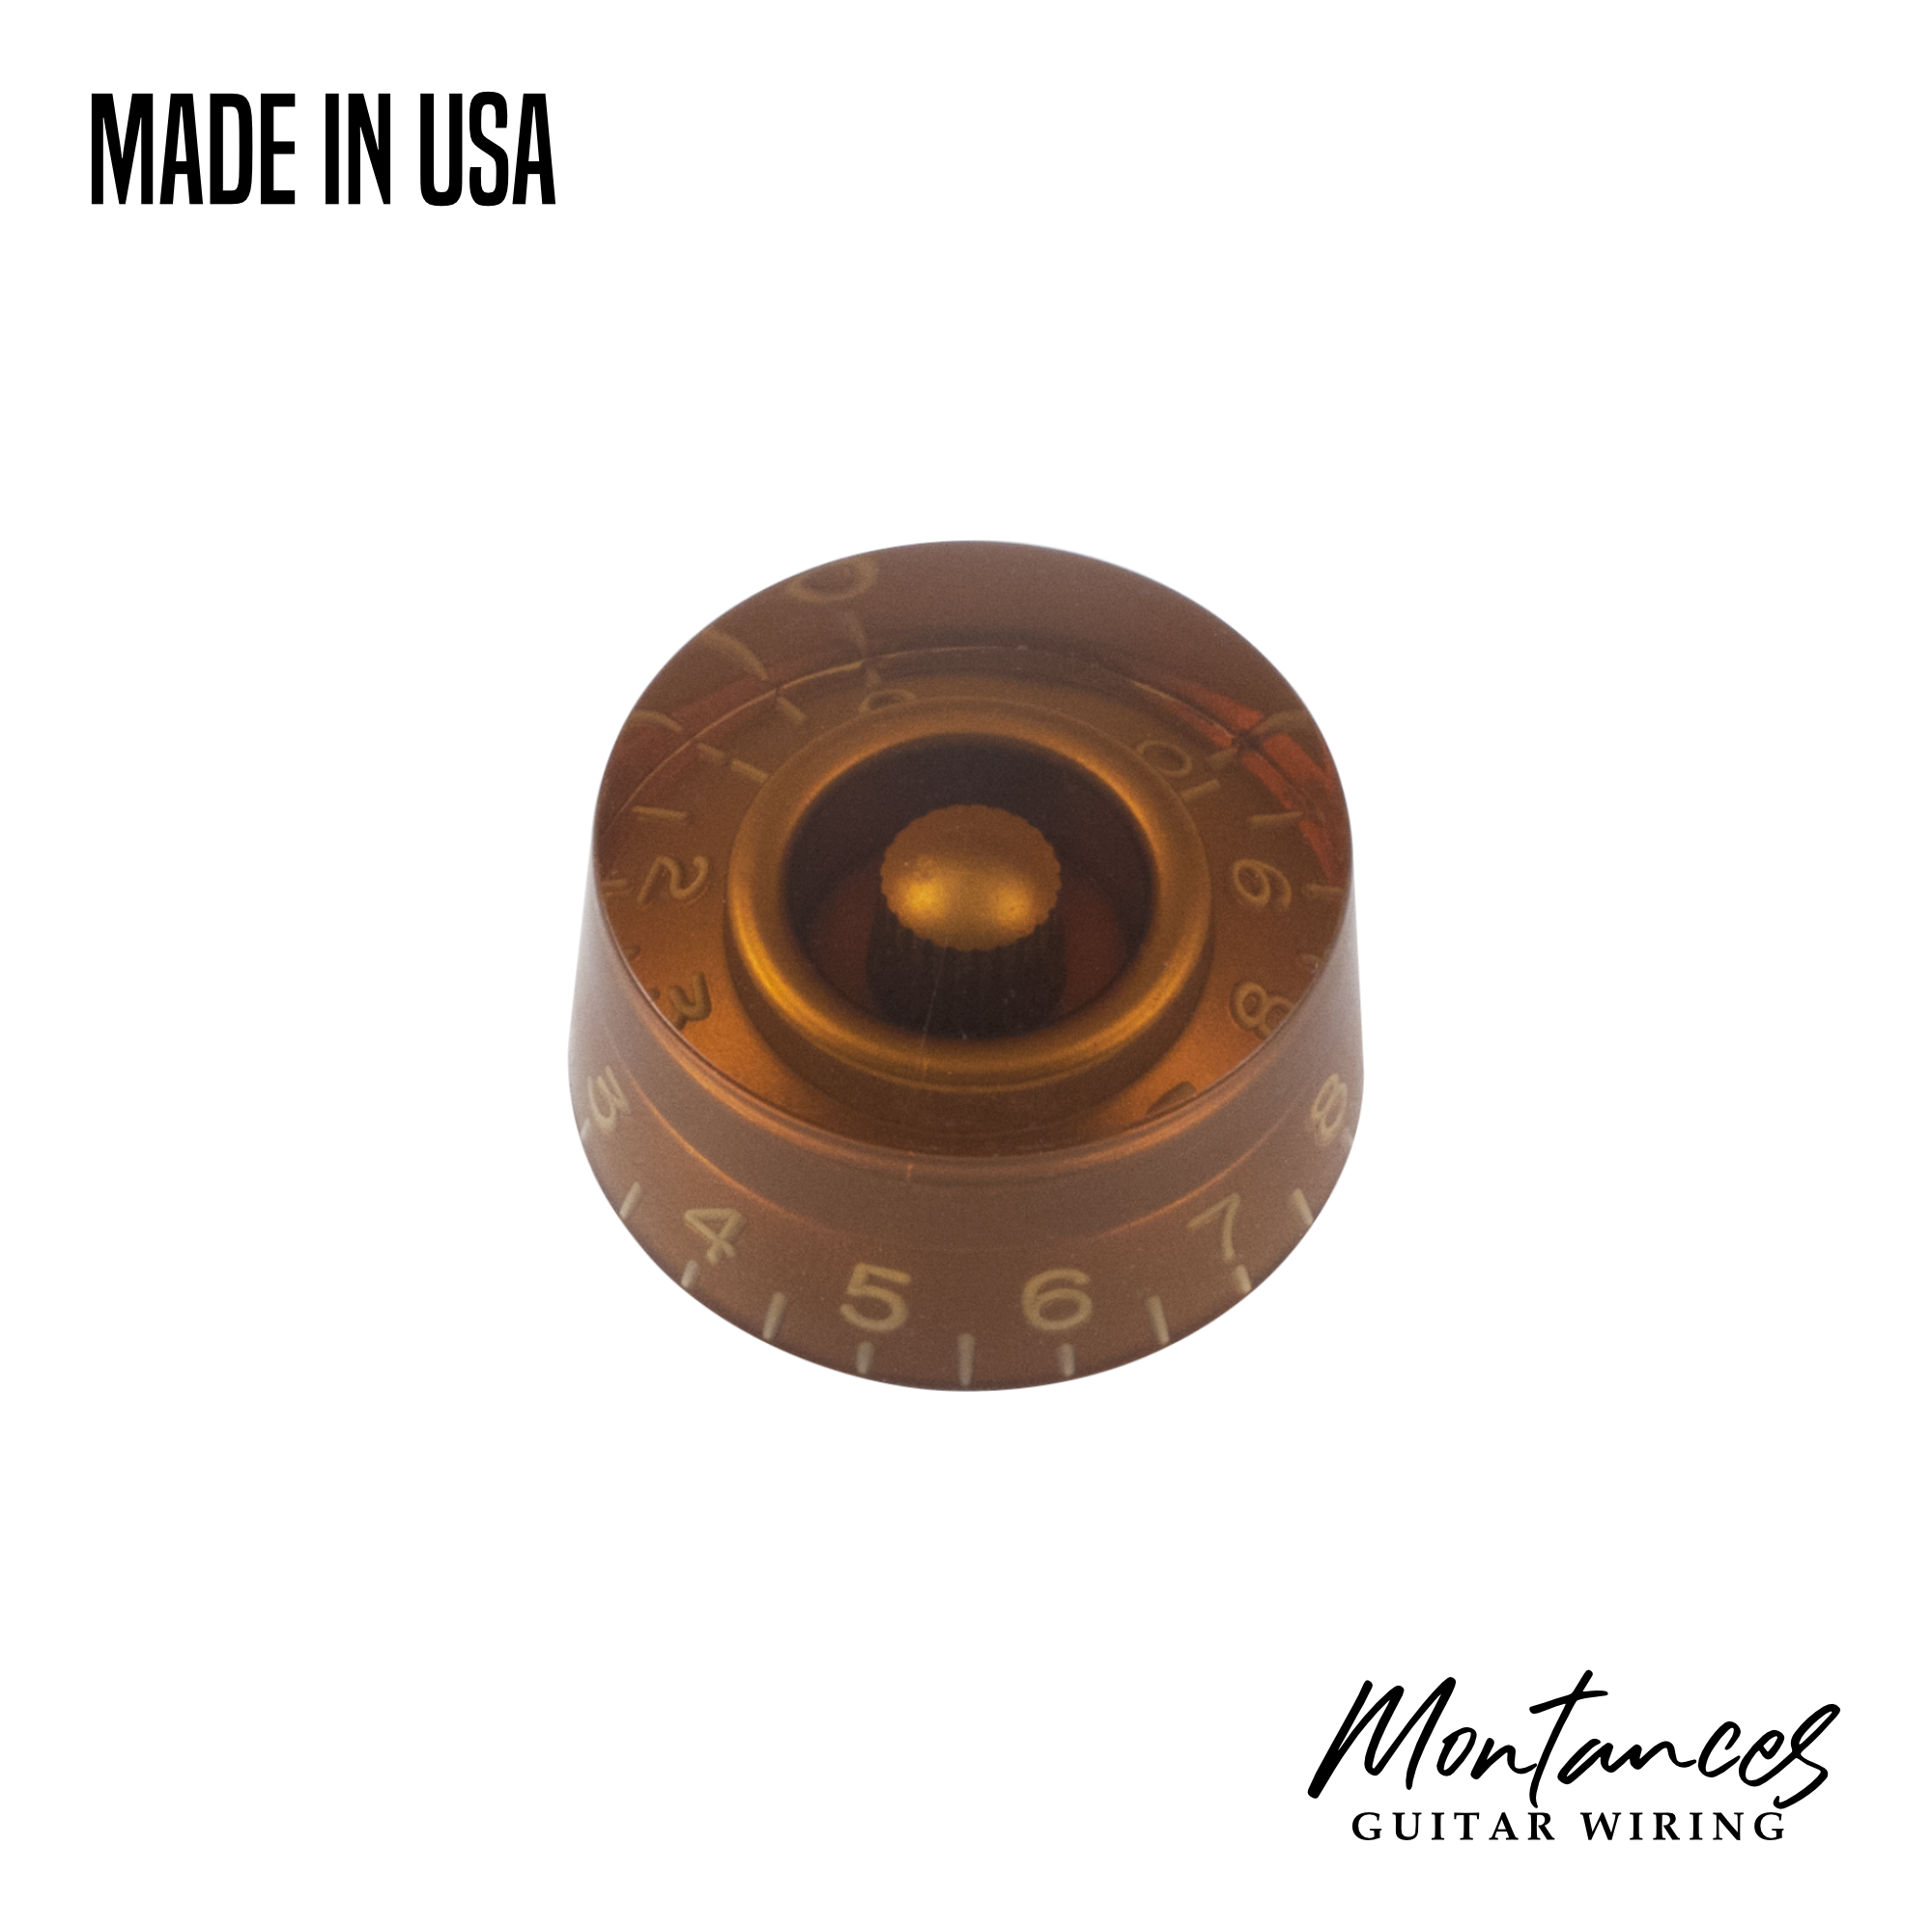 Speed Knob with Embossed Numbers, Les Paul Gibson Style made in USA, 24 splines, Sold Per Piece